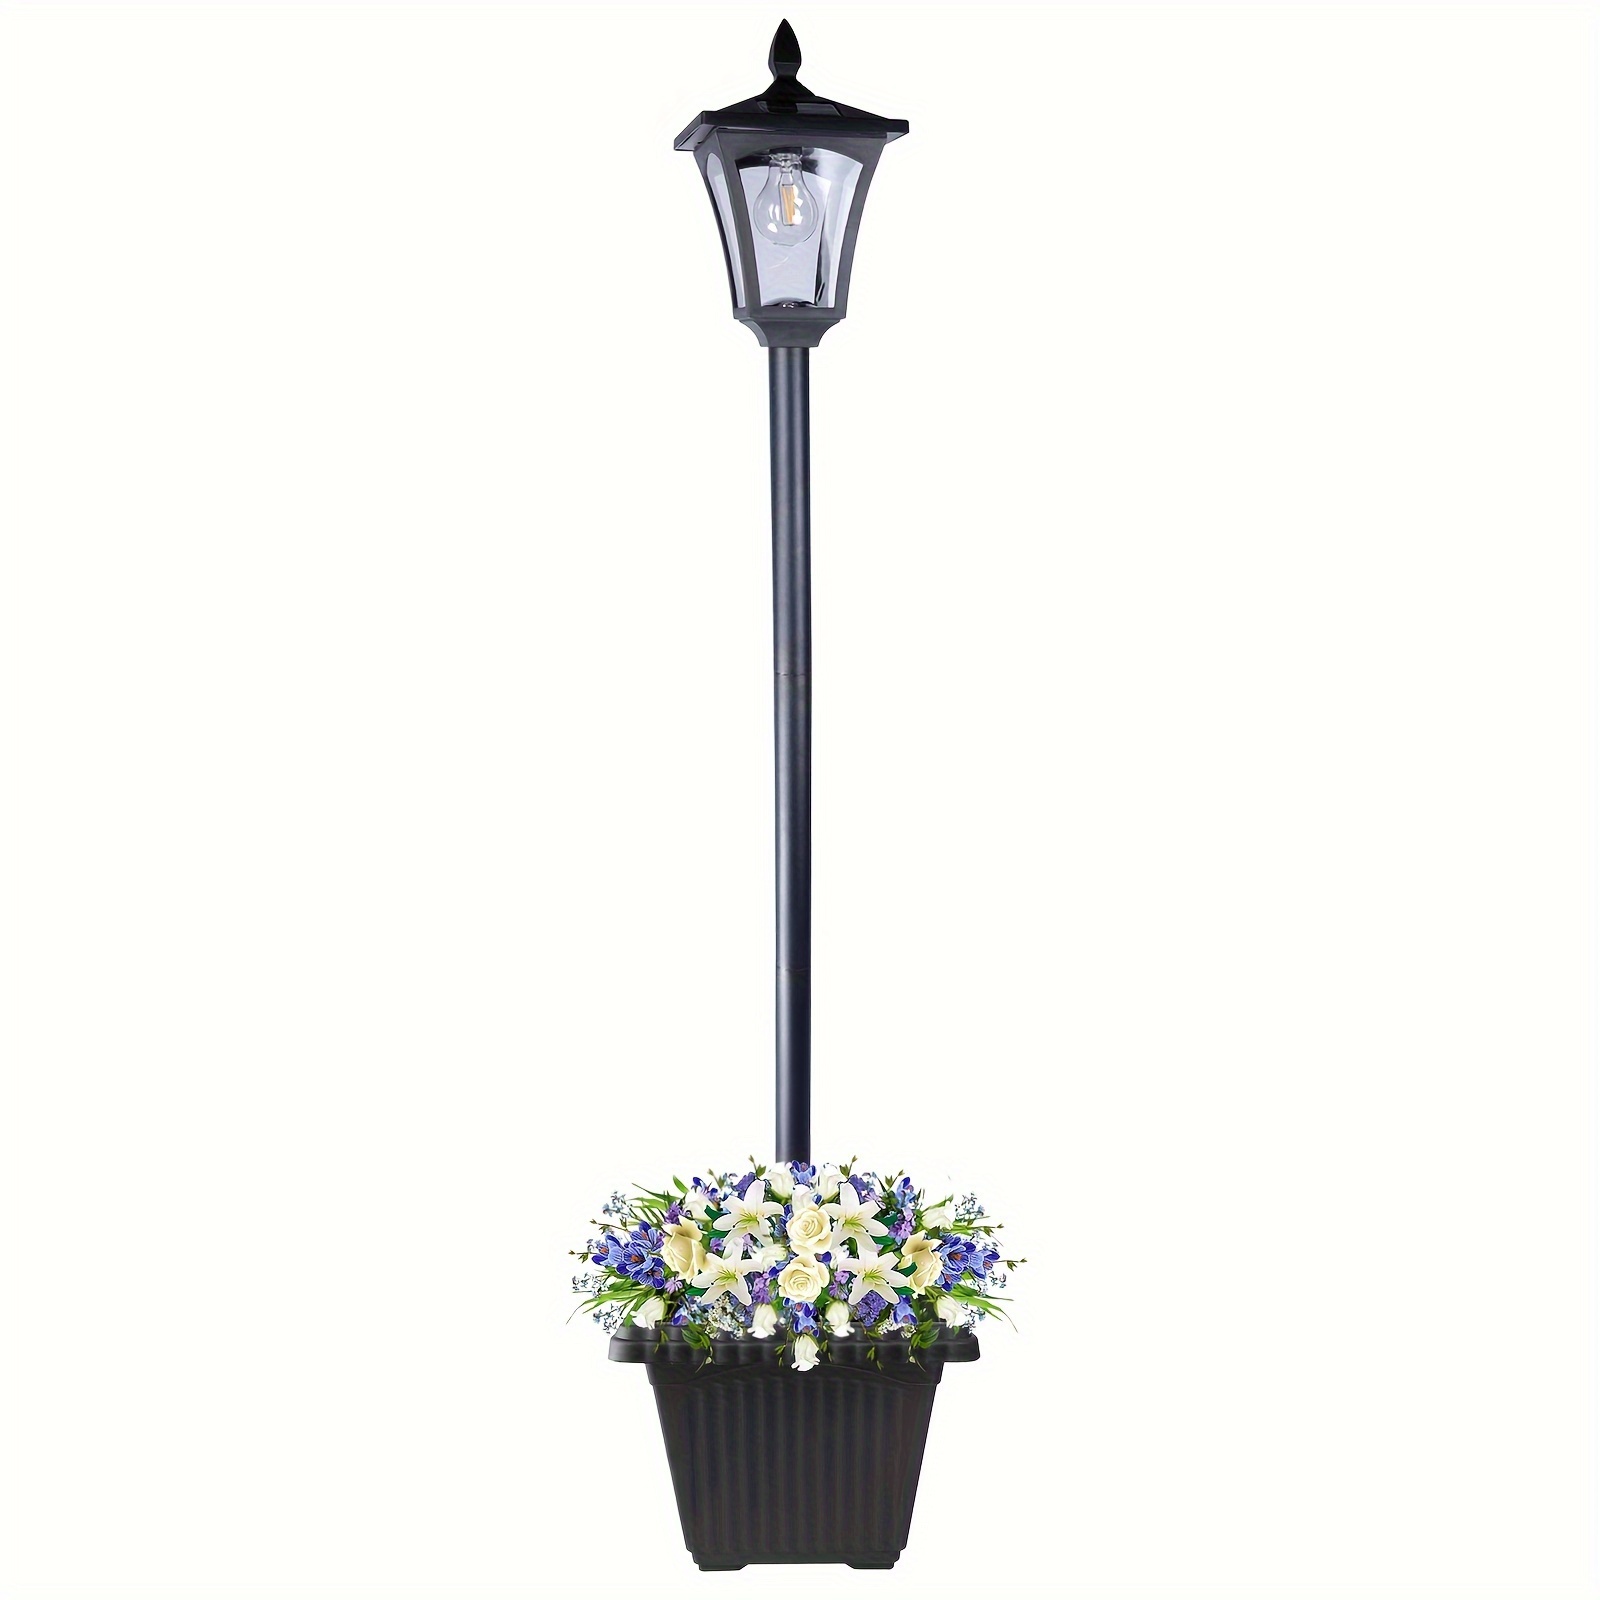 

63" Solar Lamp Post Light With Planter Solar Pole Light Outdoor Waterproof Solar Light Post Outside For Porch Yard Driveway Garden Patio Decor For Theme Park